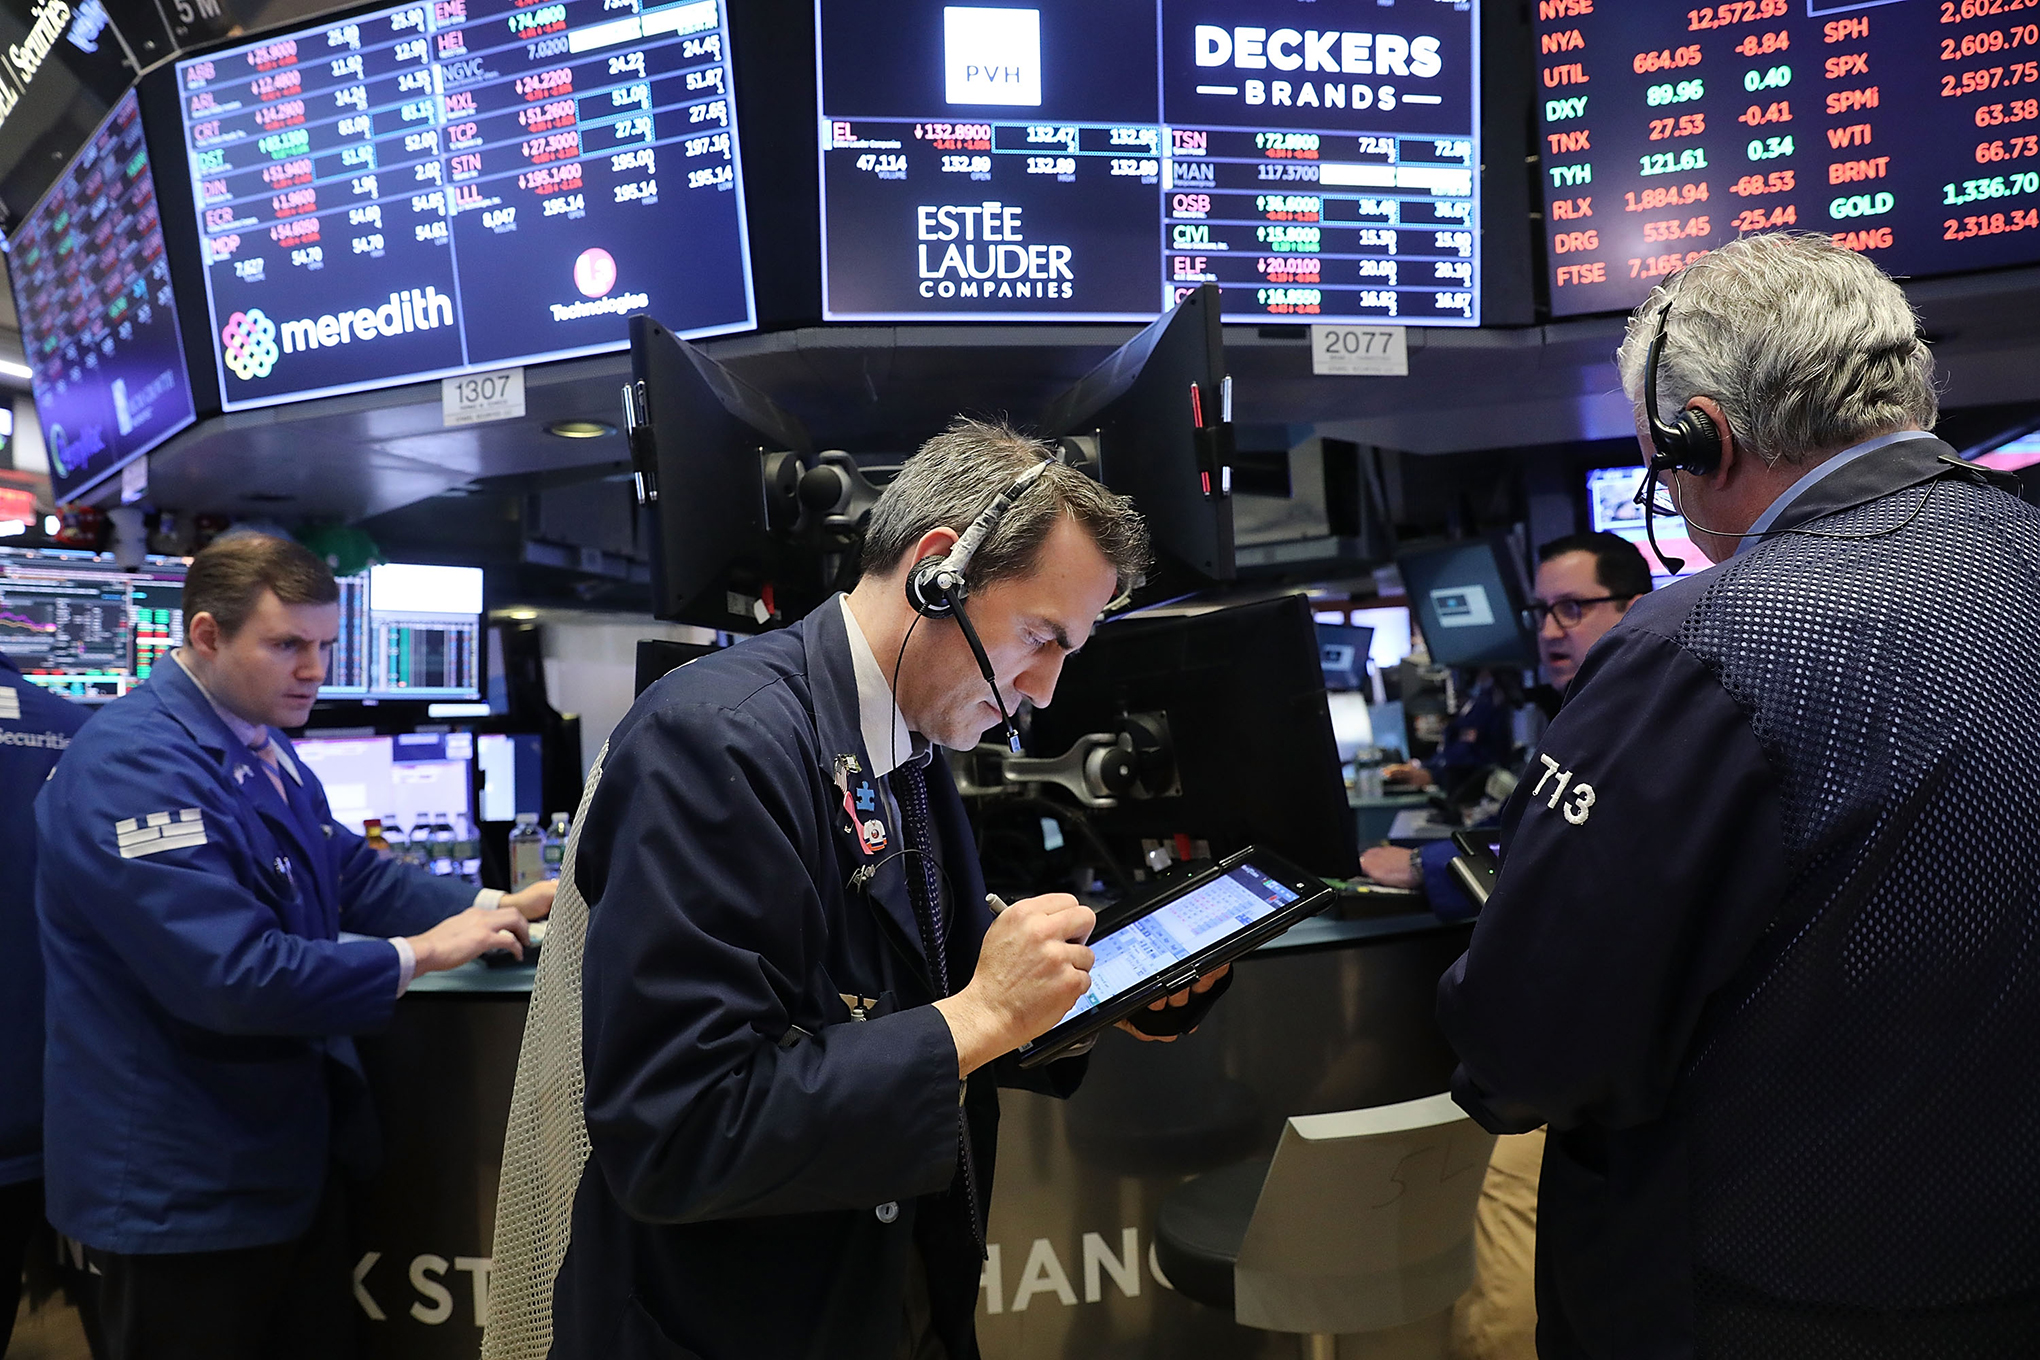 Traders work on the floor of the New York Stock Exchange (NYSE) on Feb. 6, 2018 in New York. (Spencer Platt—Getty Images)